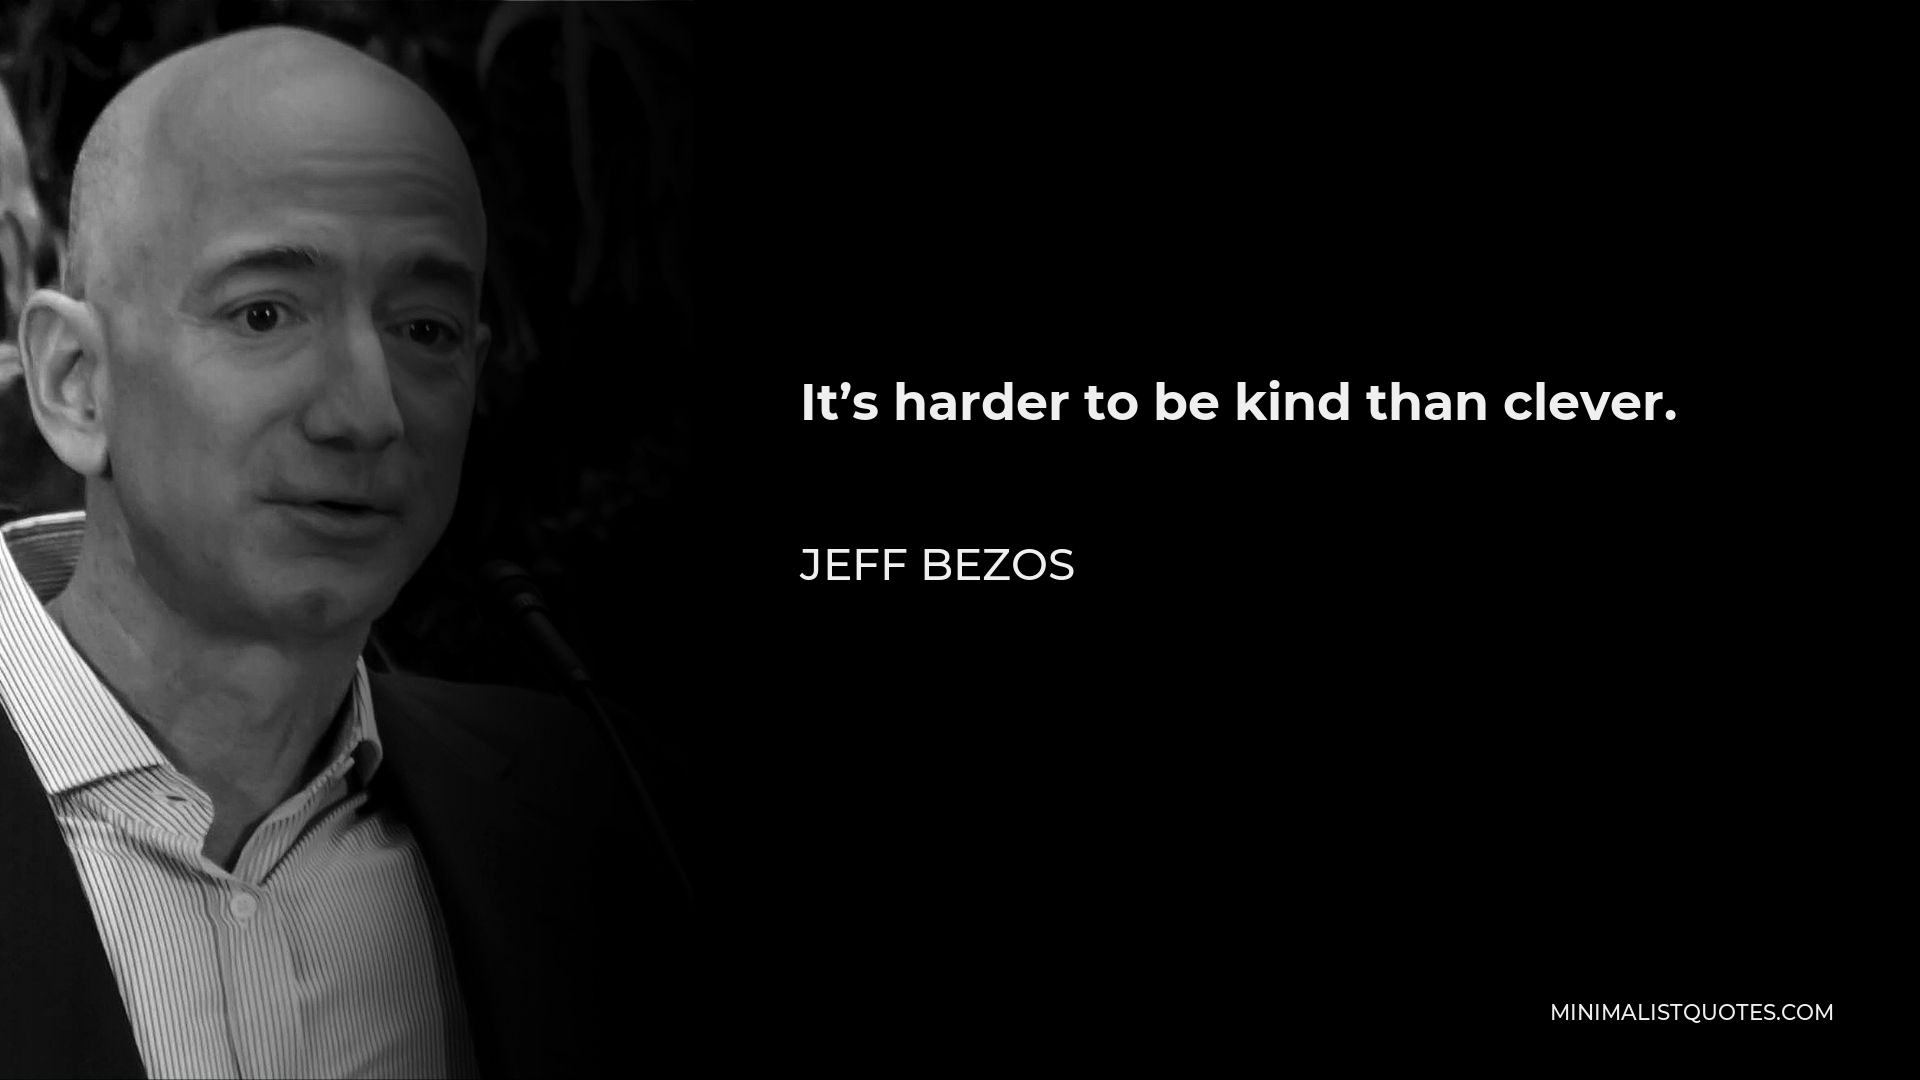 Jeff Bezos Quote - It’s harder to be kind than clever.